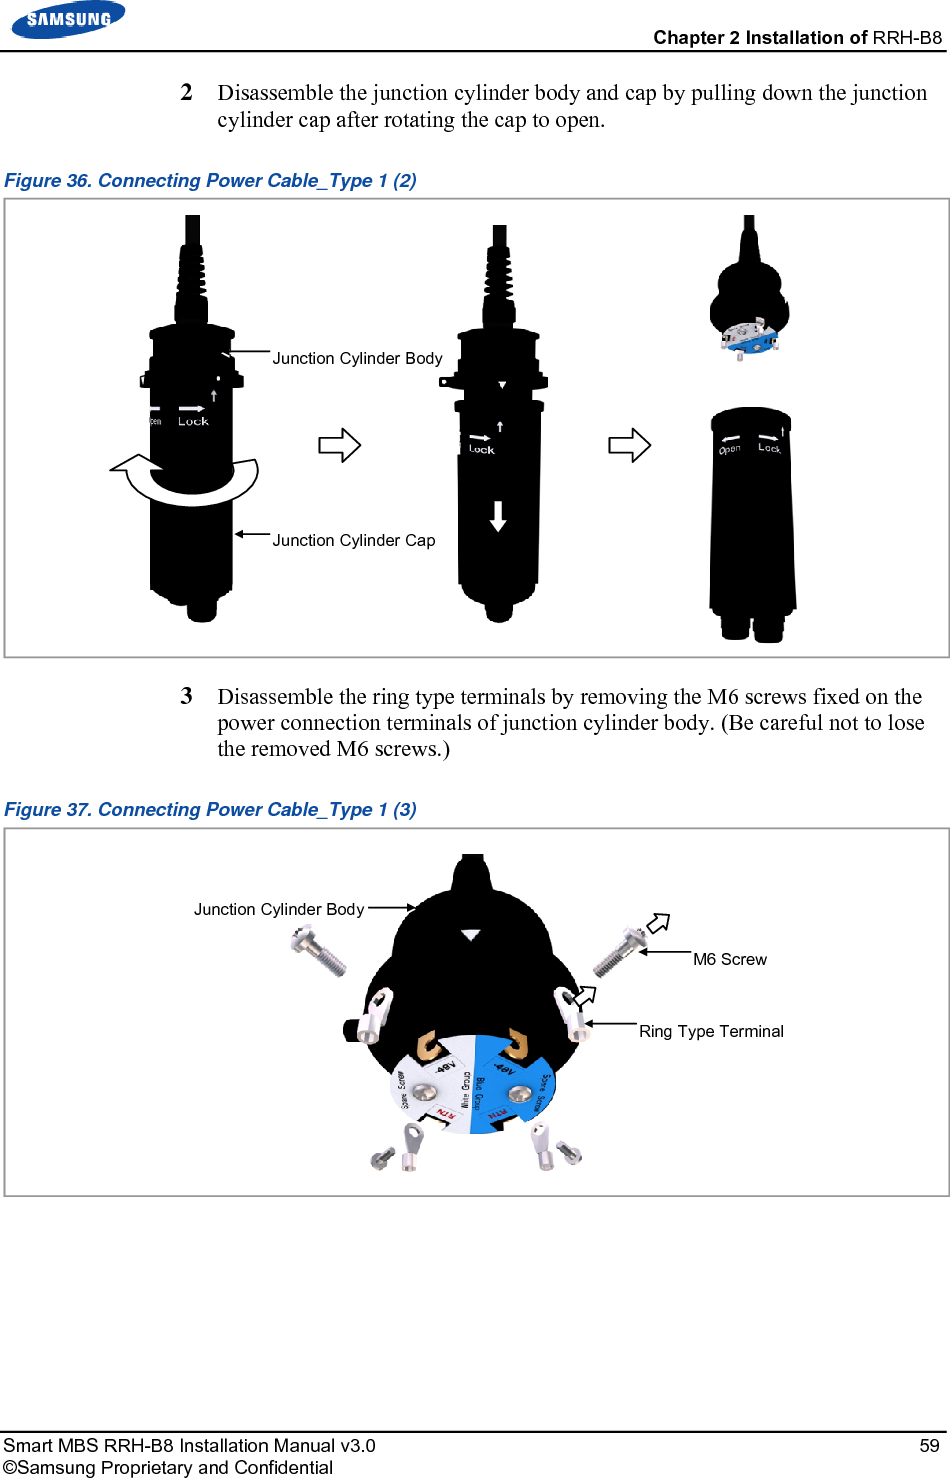  Chapter 2 Installation of RRH-B8 Smart MBS RRH-B8 Installation Manual v3.0   59 ©Samsung Proprietary and Confidential 2  Disassemble the junction cylinder body and cap by pulling down the junction cylinder cap after rotating the cap to open. Figure 36. Connecting Power Cable_Type 1 (2)  3  Disassemble the ring type terminals by removing the M6 screws fixed on the power connection terminals of junction cylinder body. (Be careful not to lose the removed M6 screws.) Figure 37. Connecting Power Cable_Type 1 (3)    Ring Type Terminal Junction Cylinder BodyM6 Screw Junction Cylinder CapJunction Cylinder Body